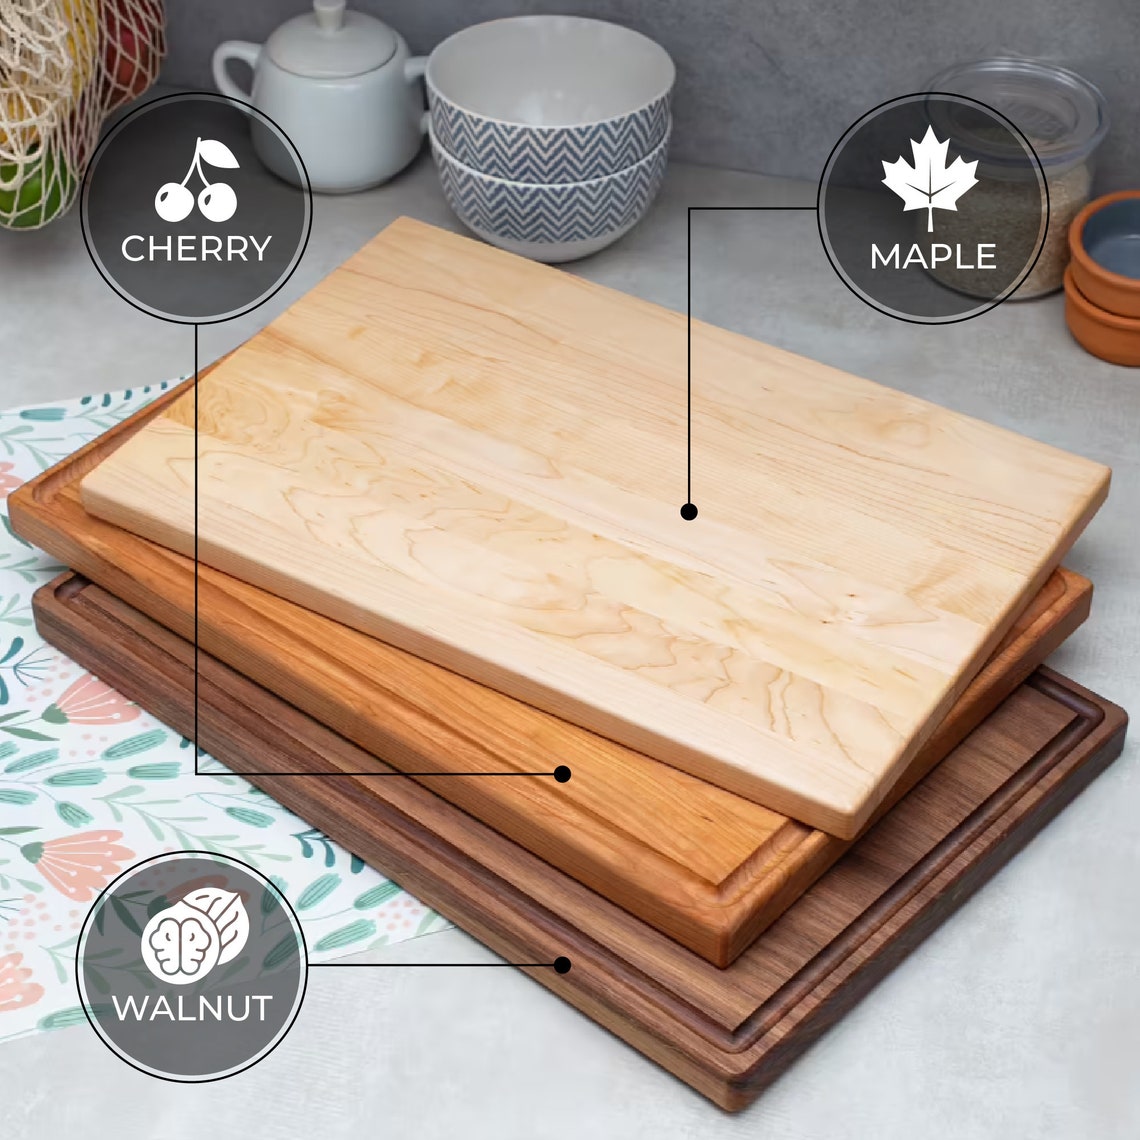 Cutting Board - Square Paddle - Customize Yours